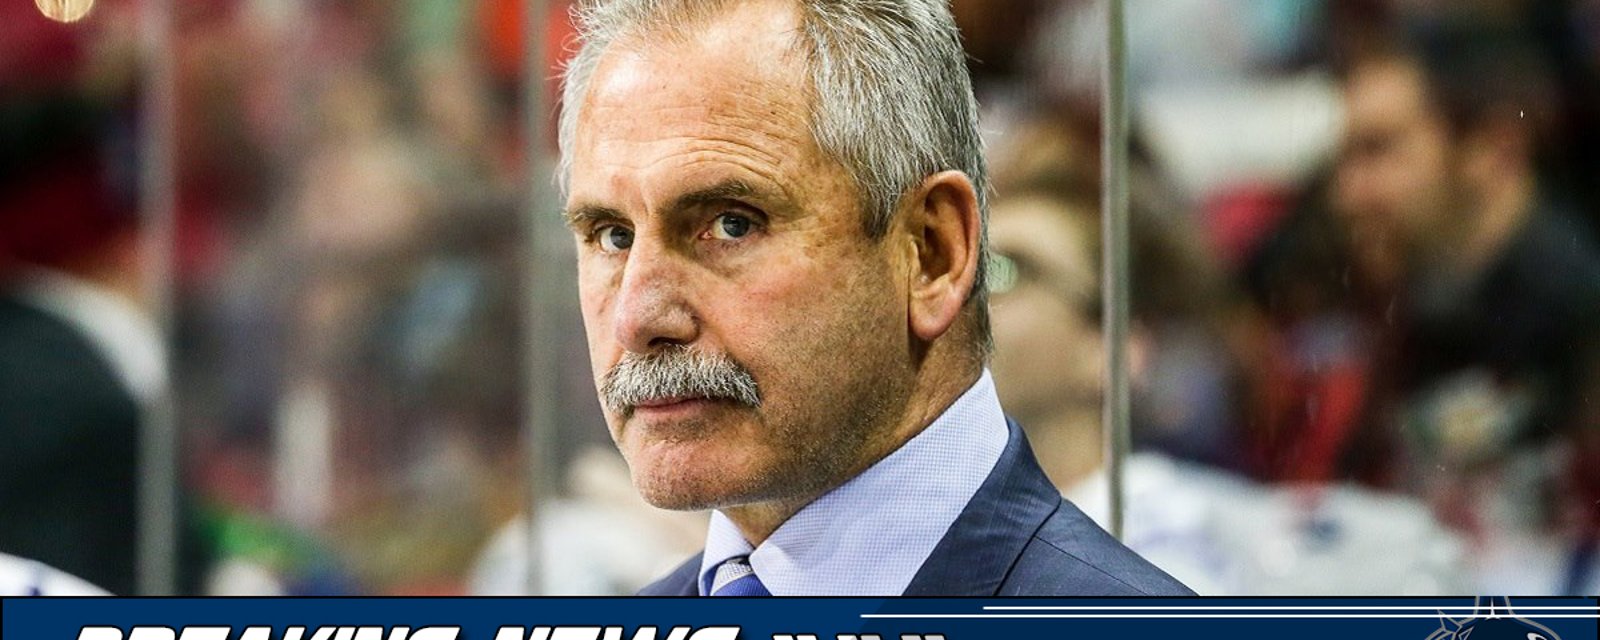 Breaking News: Willie Desjardins has harsh comments for one of his player.